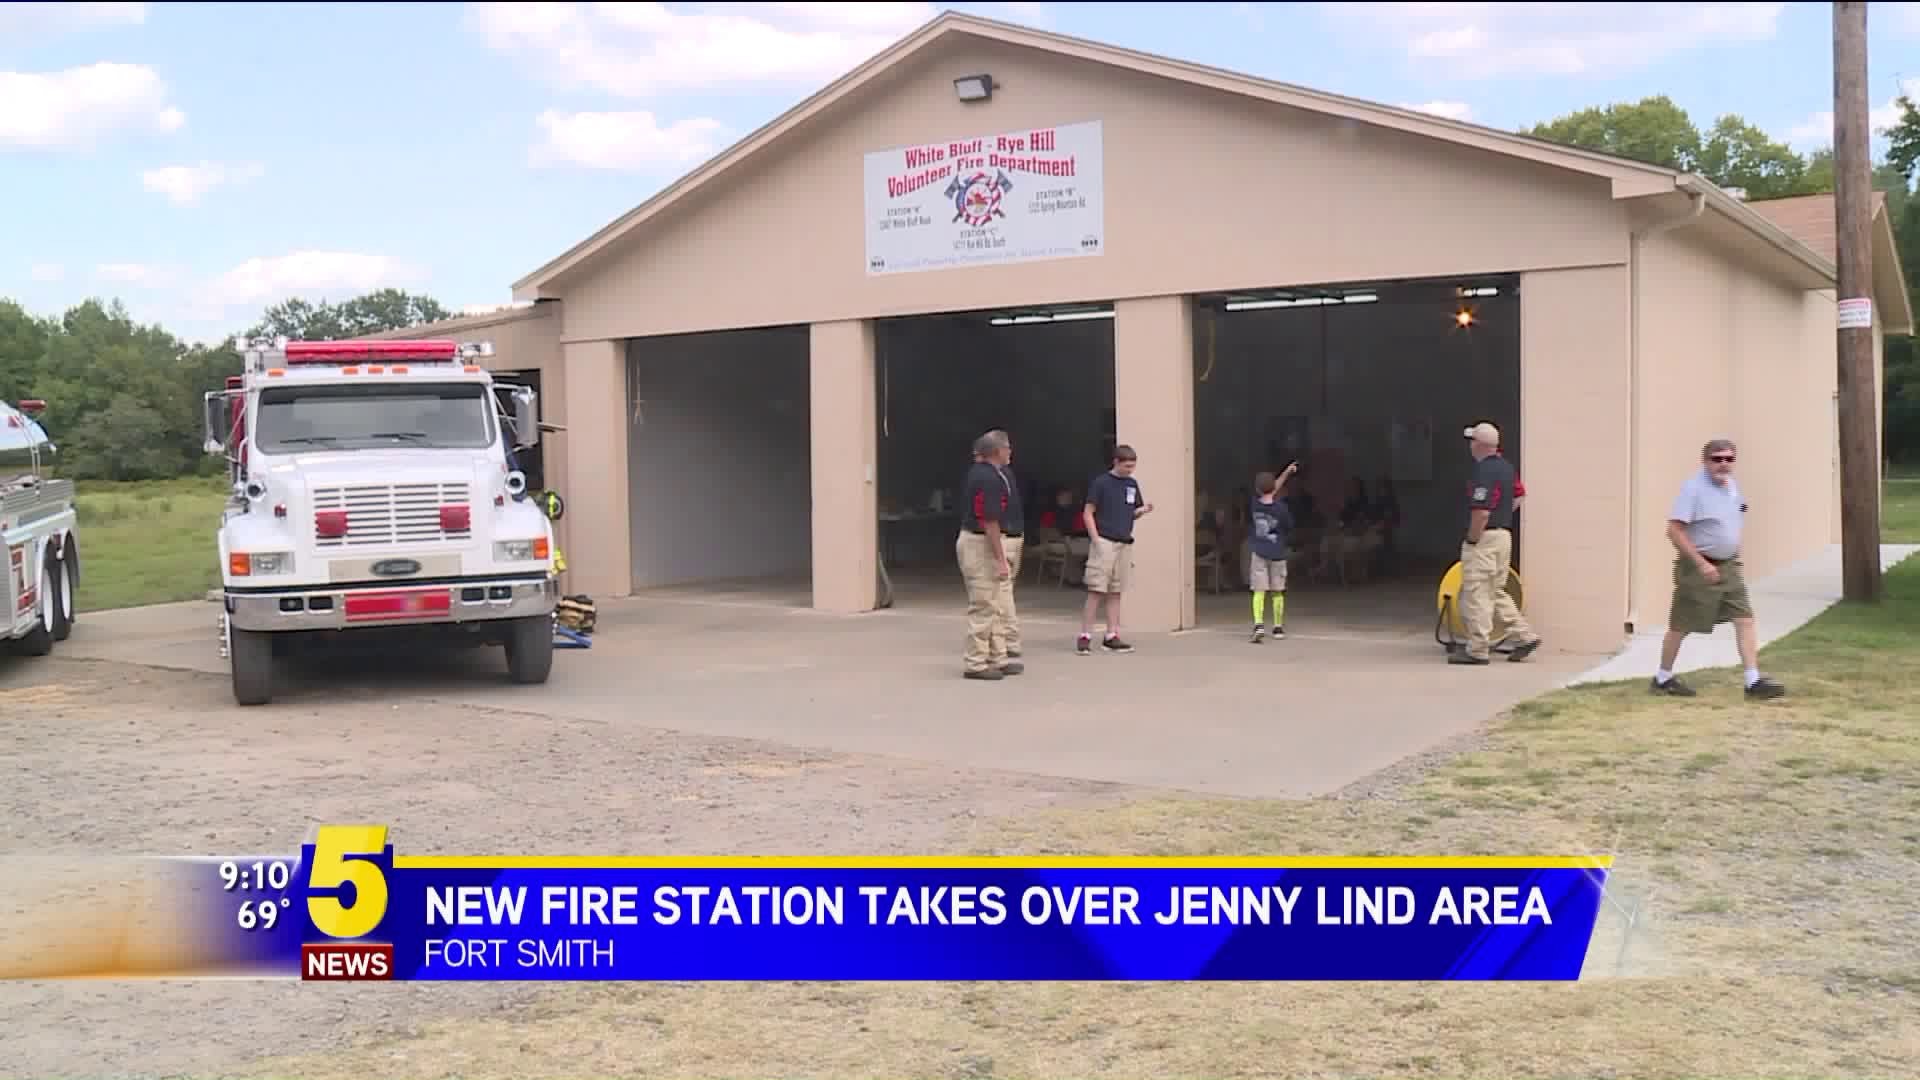 Fire Station Takes Over Jenny Lind Area